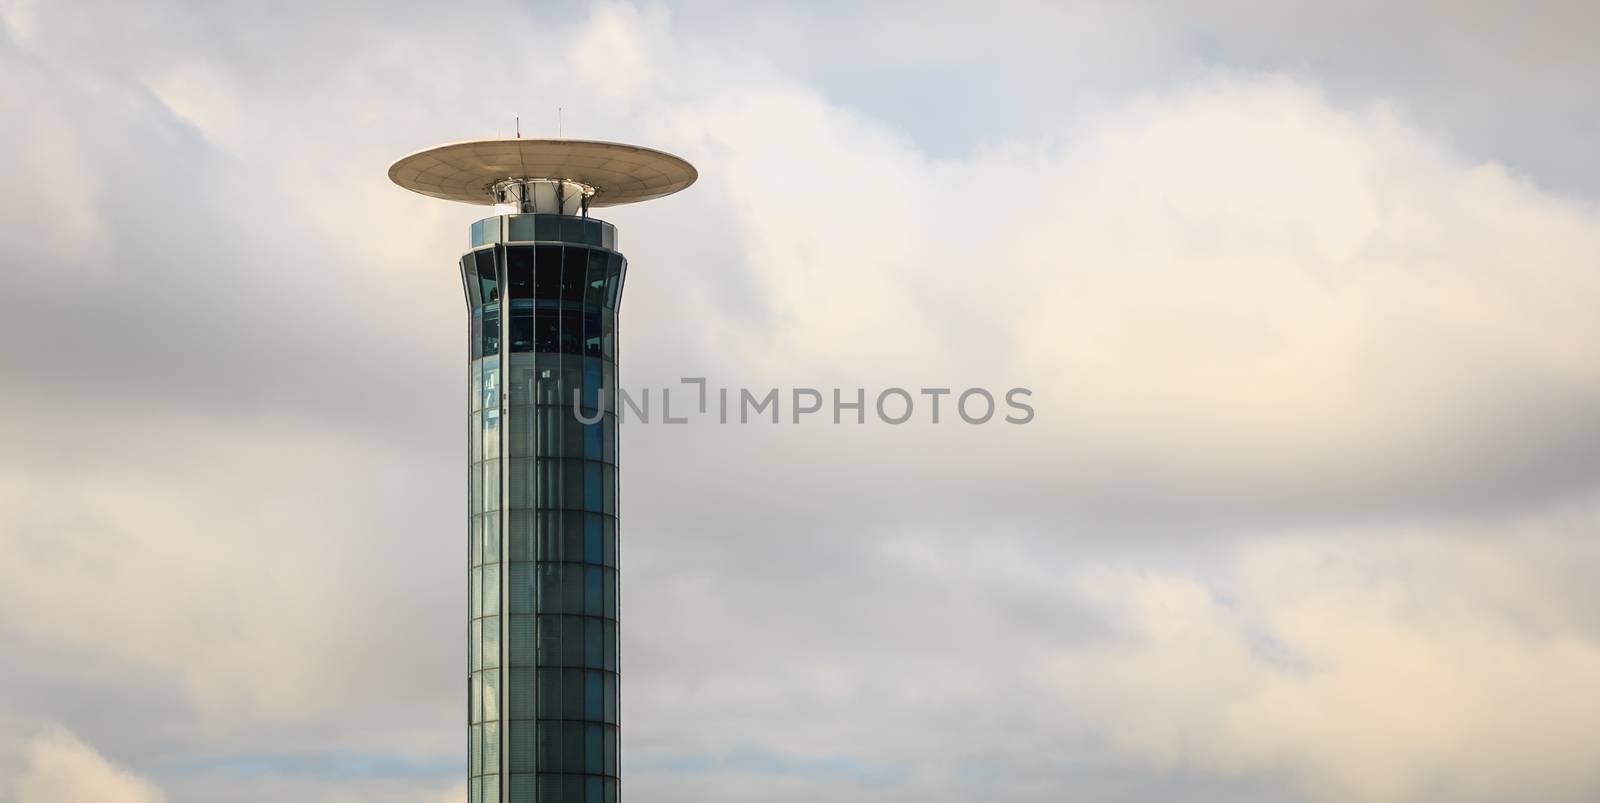 Roissy near Paris, France - October 08, 2017 : exterior view of the Airport traffic control tower south of Roissy Charles De Gaulle airport on a fall day